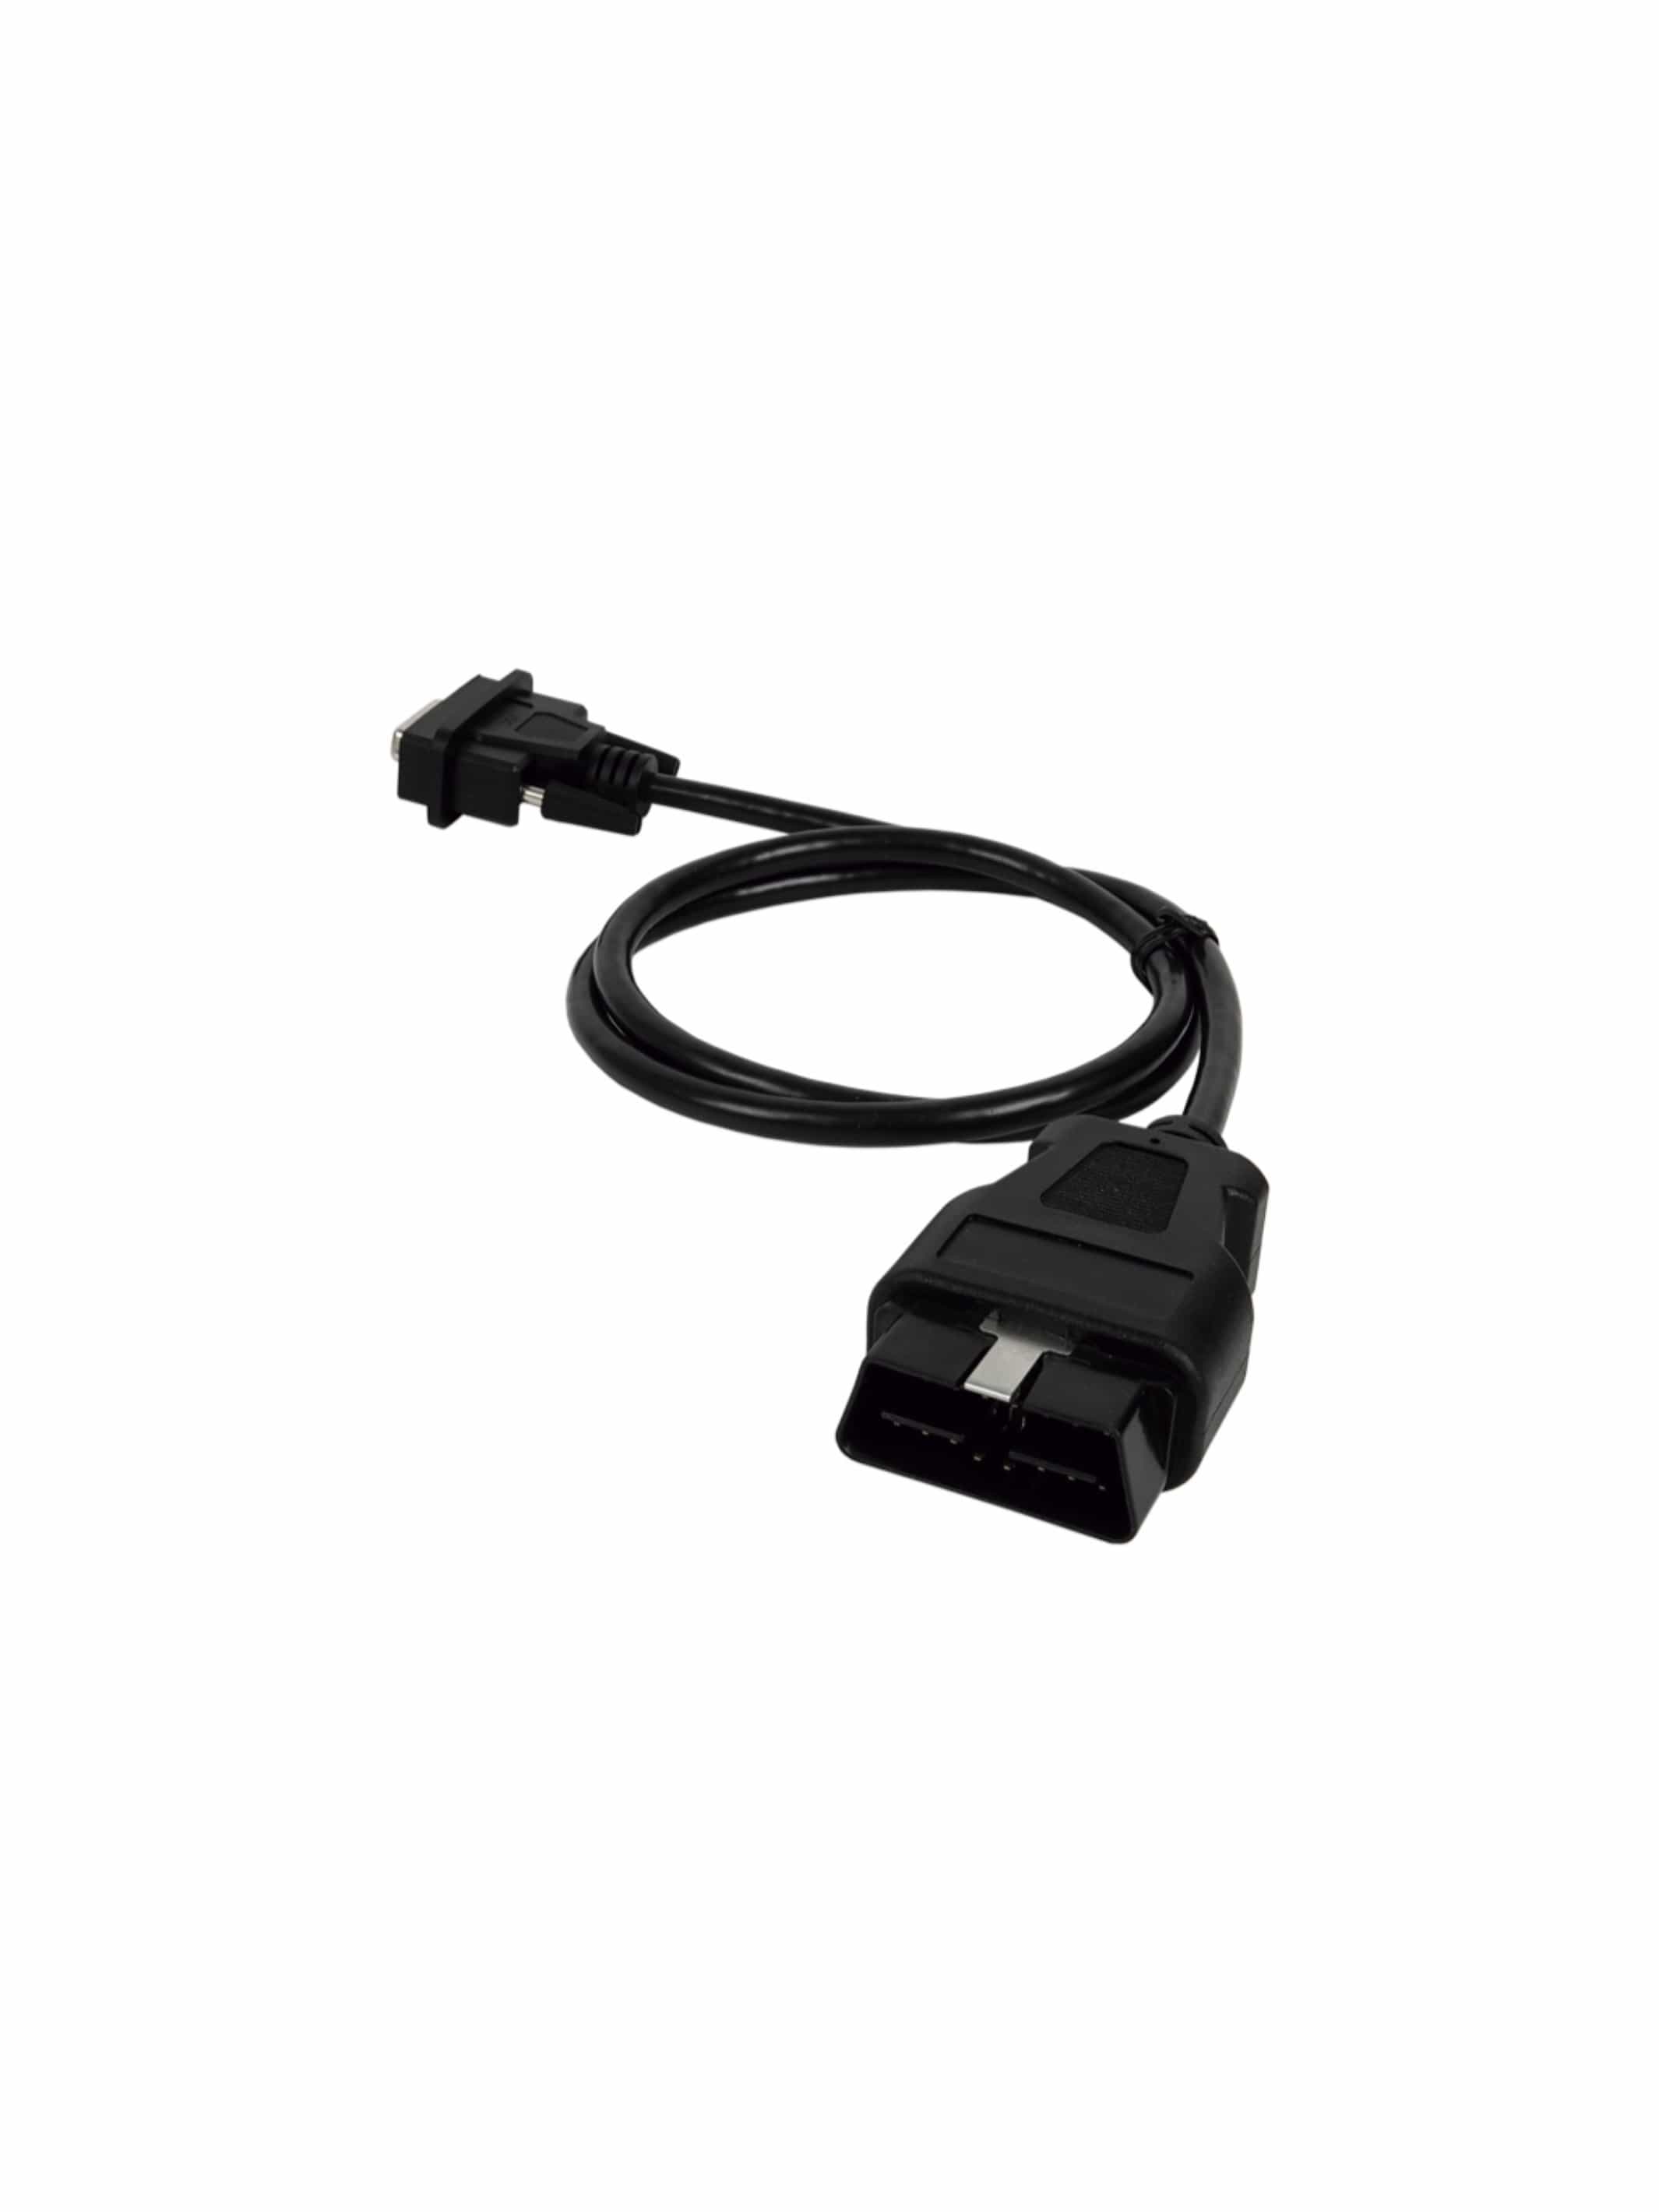 JDC213.9 OBD Diagnostics Cable - Jaltest Agricultural & Construction, Heavy Equipment MH, Power Systems Deluxe Diagnostic Tool Kit